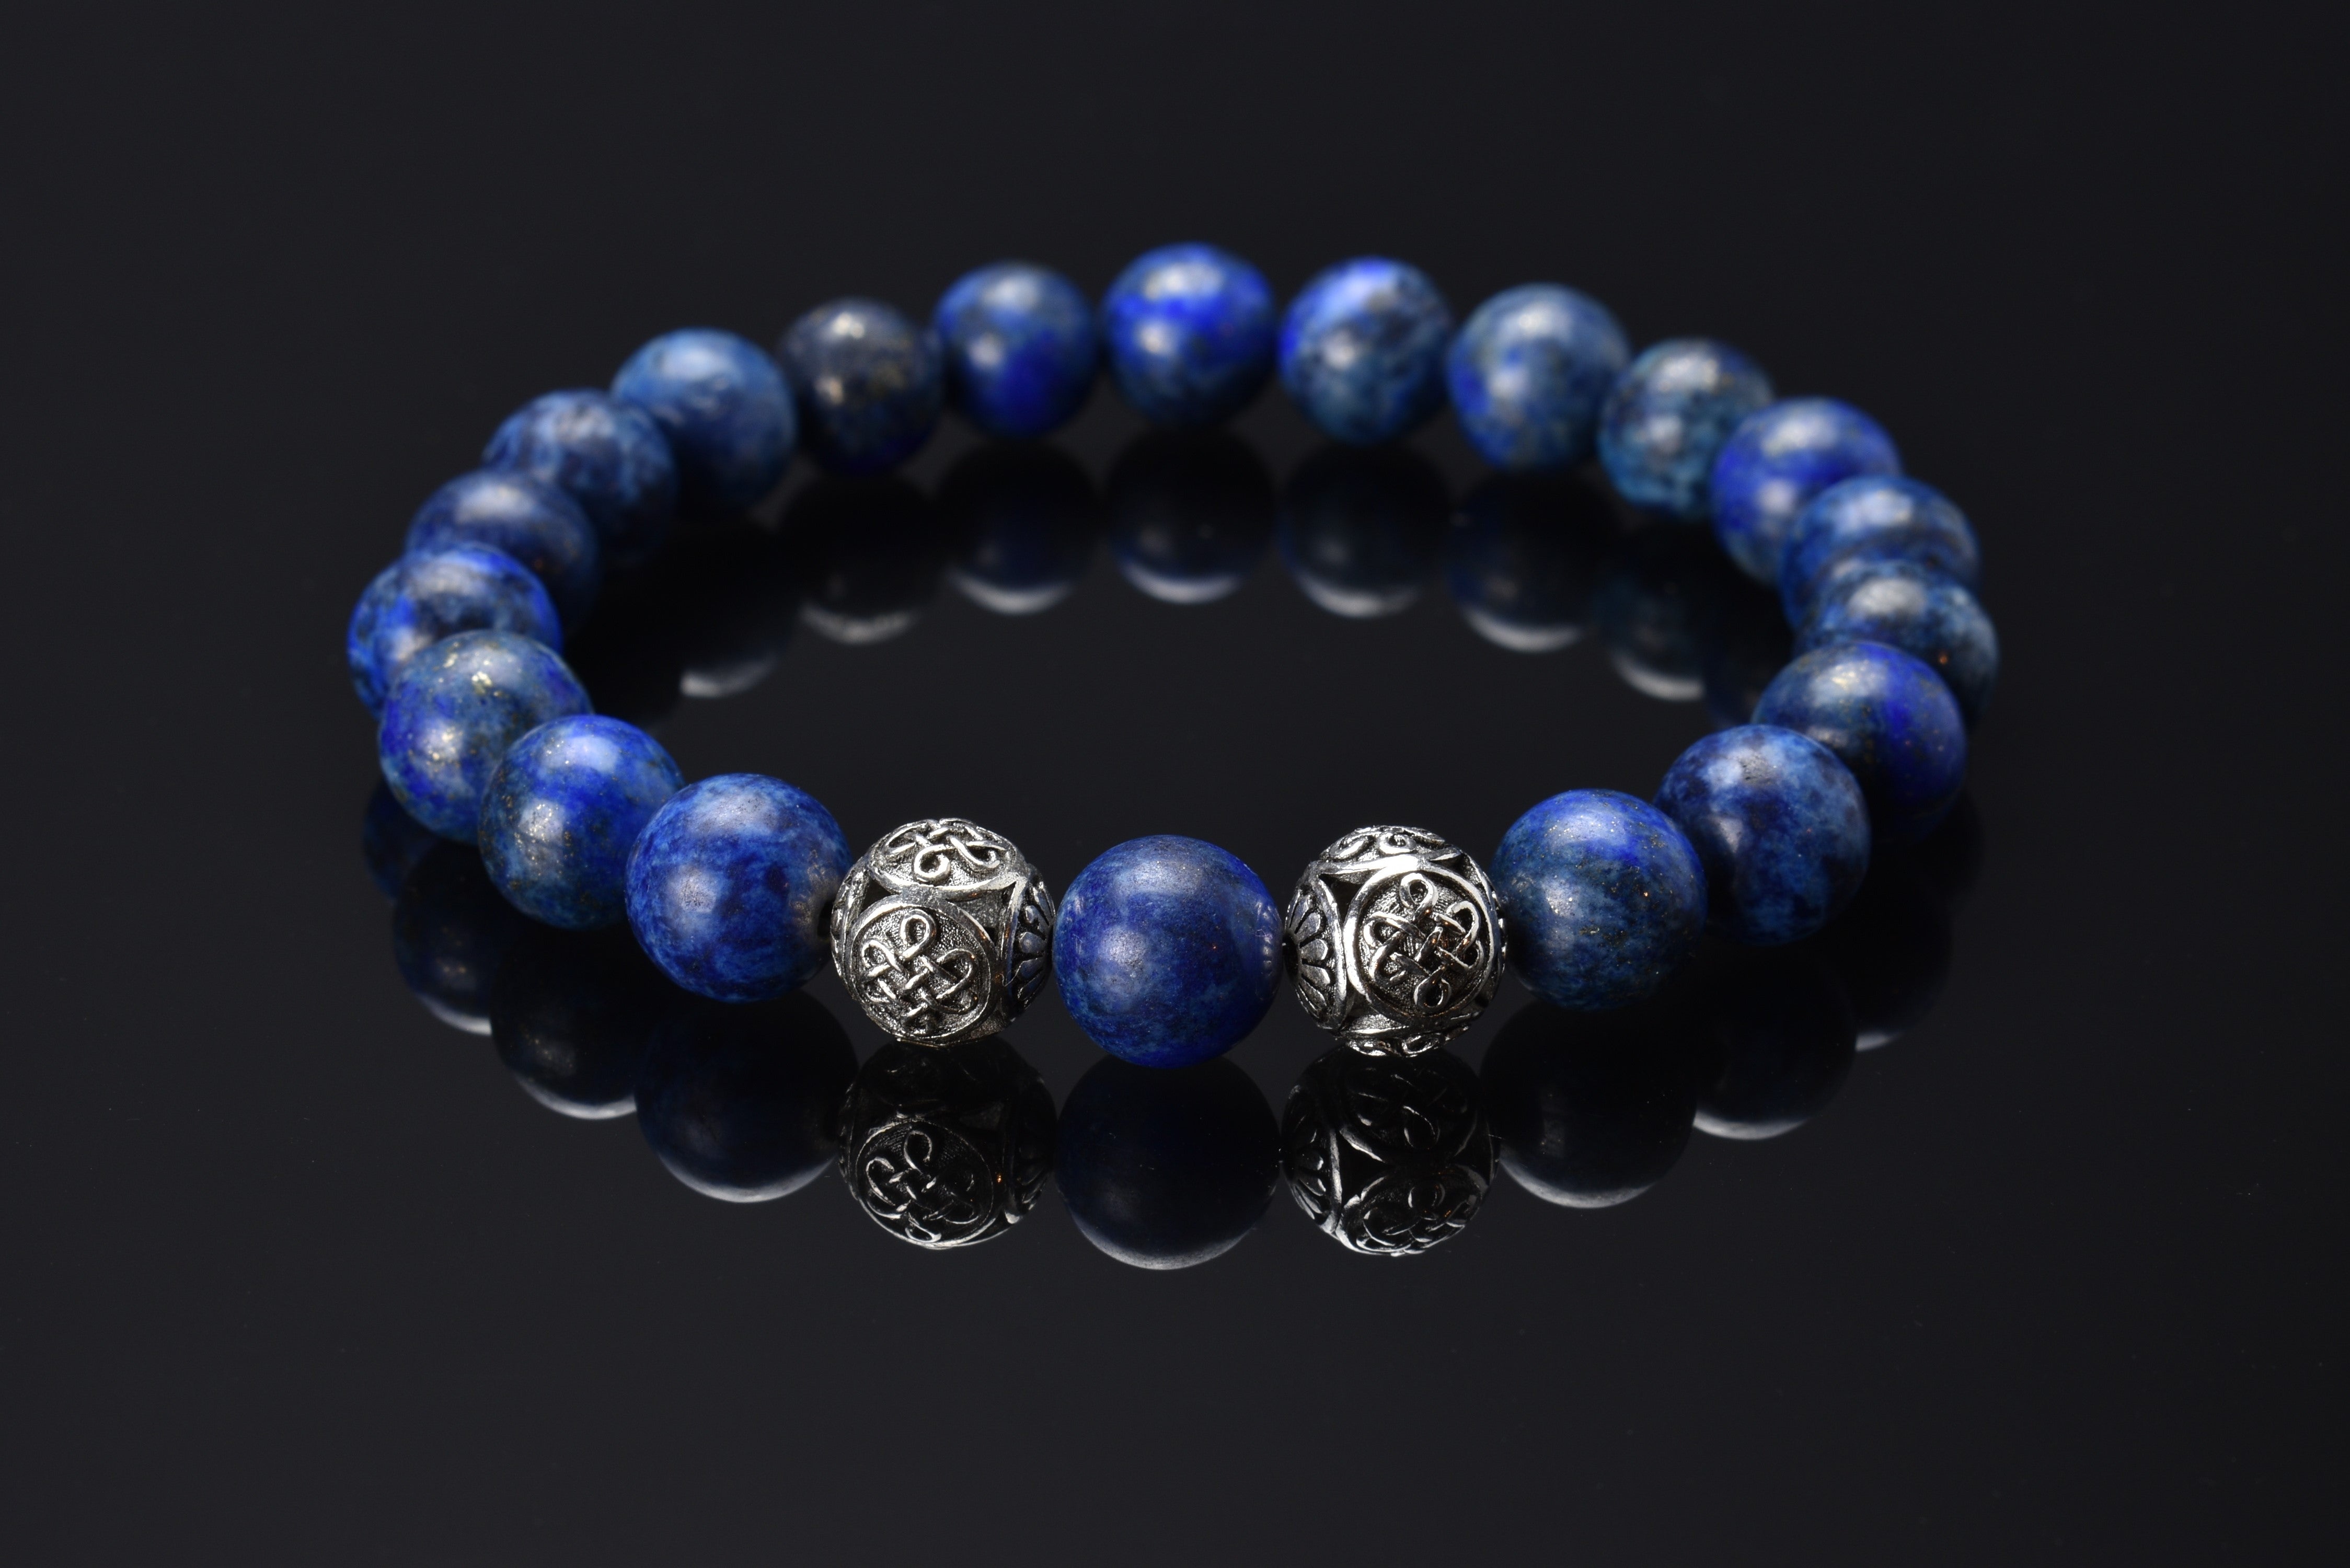 Silver Lockit Beads Bracelet, Silver and Blue Polyester Cord